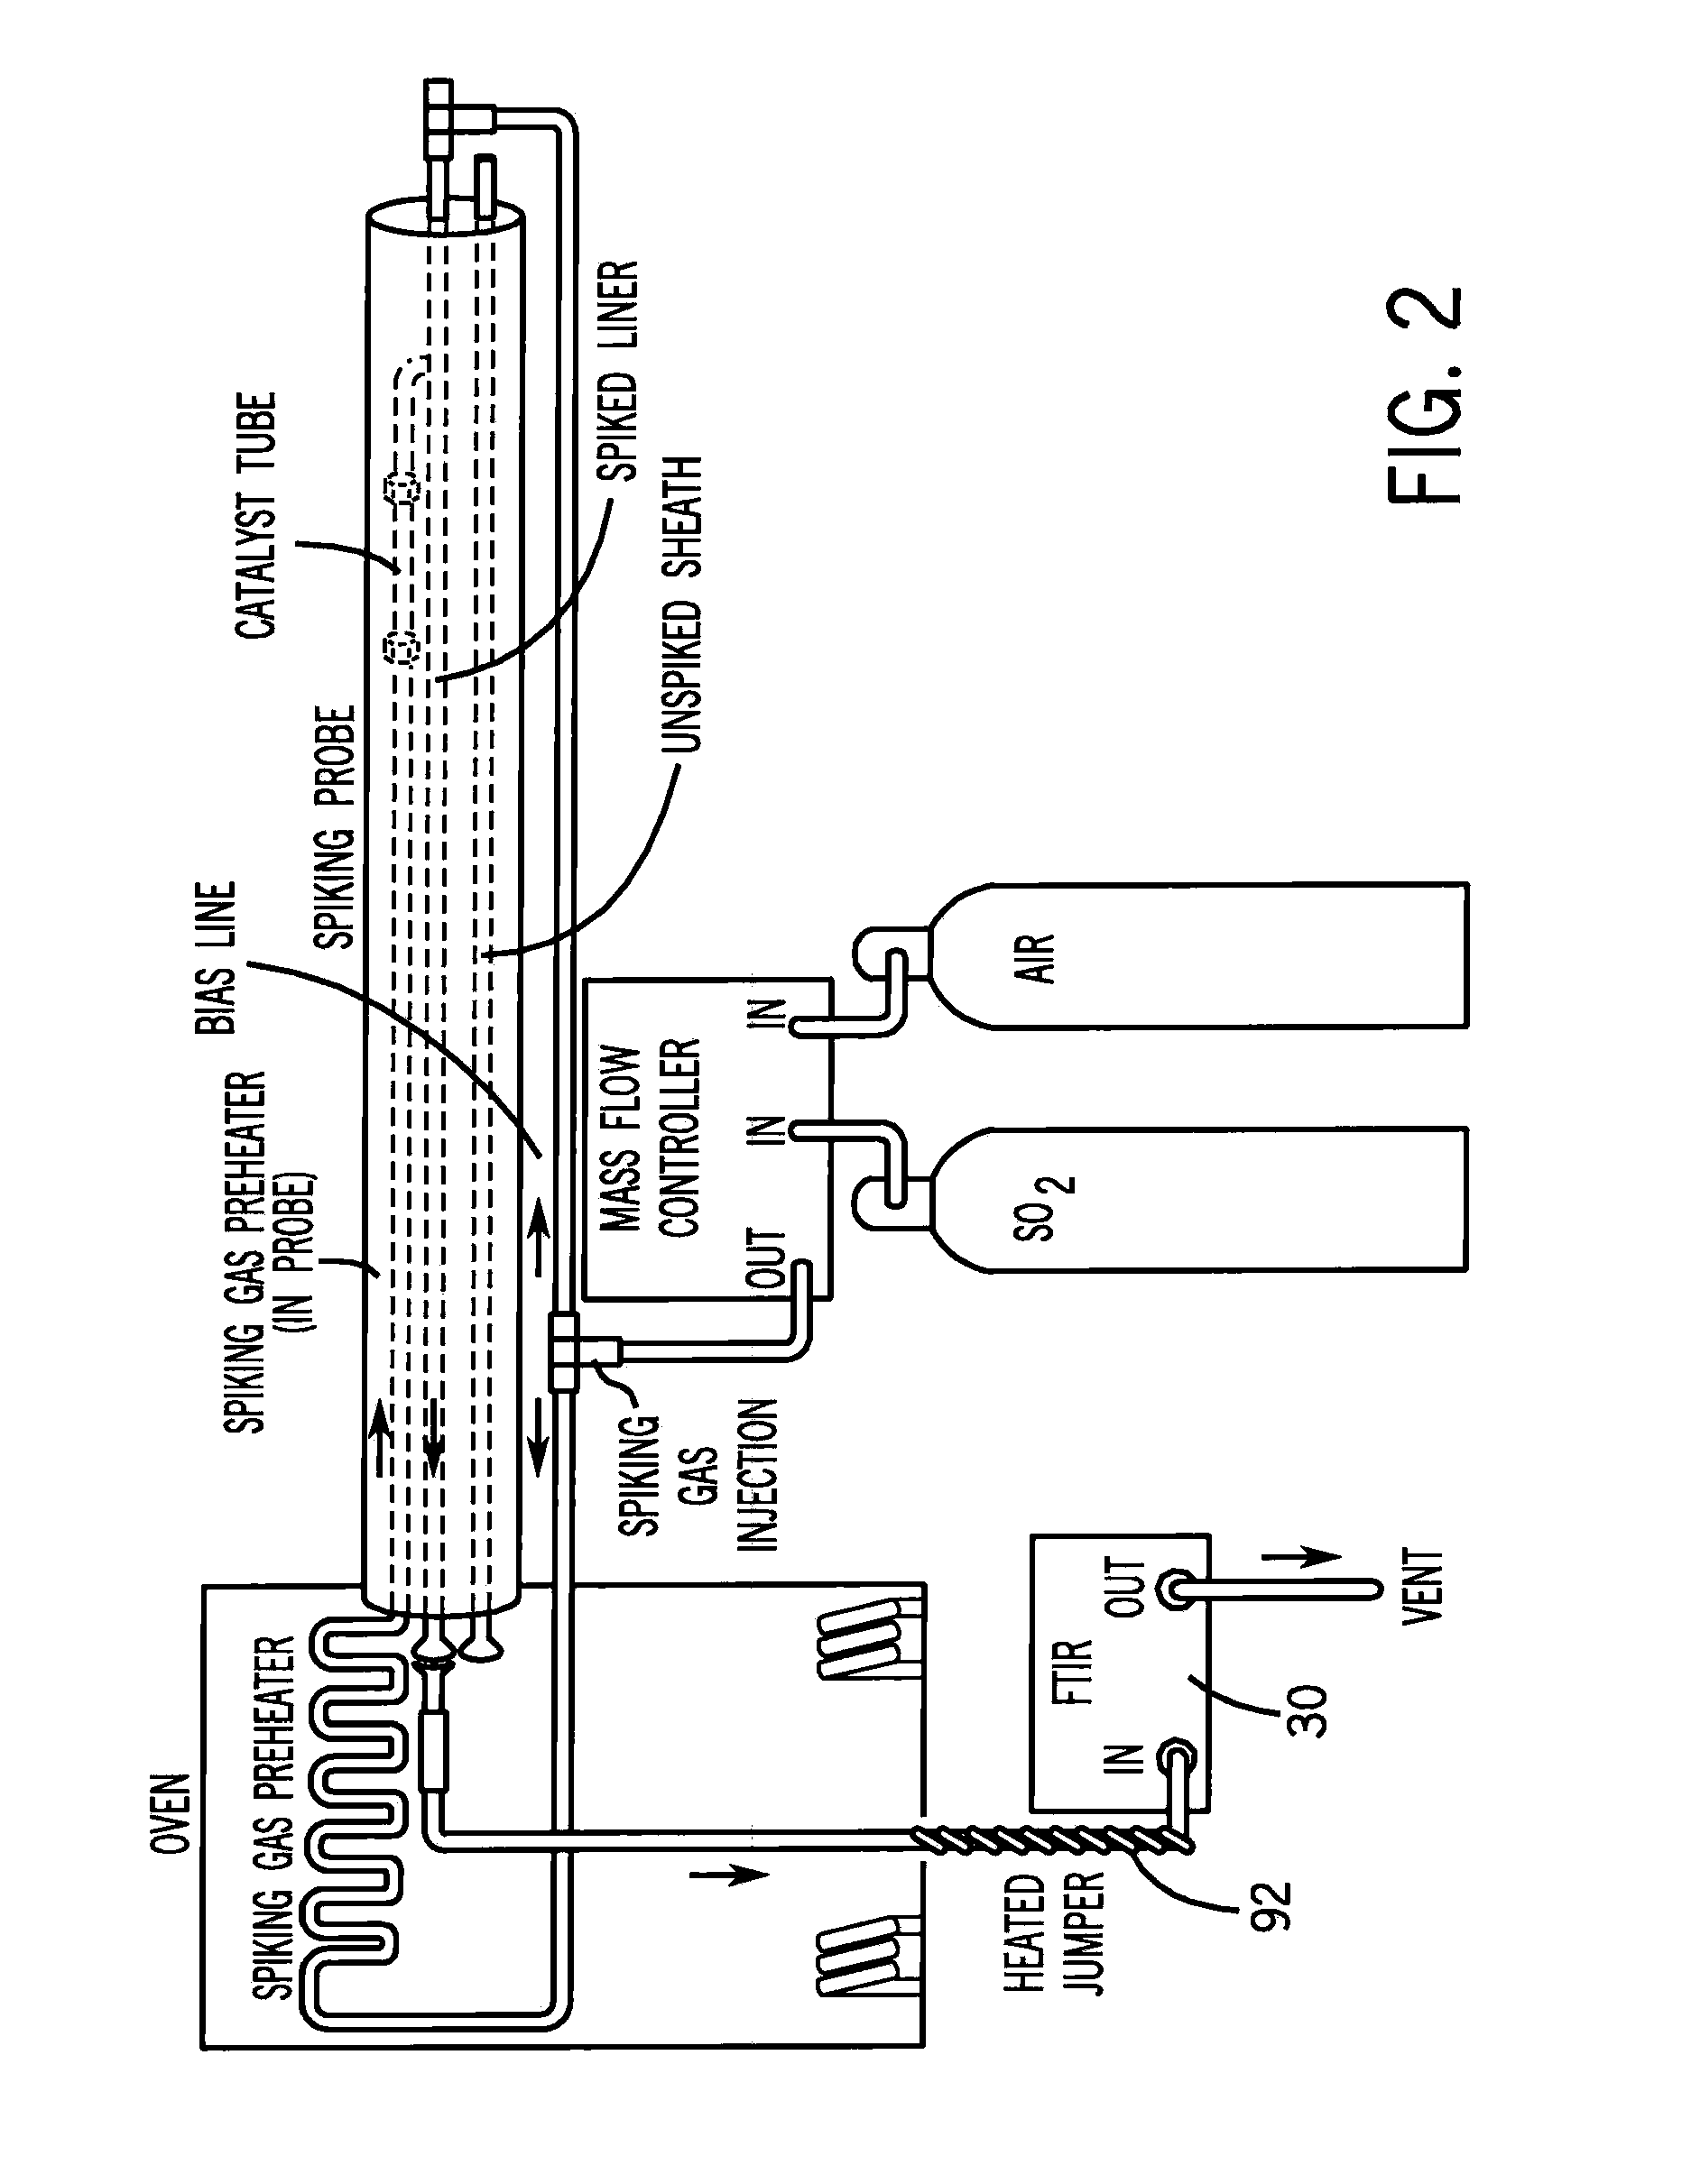 Flue Gas Monitoring And Dynamic Spiking For Sulfur Trioxide/Sulfuric Acid